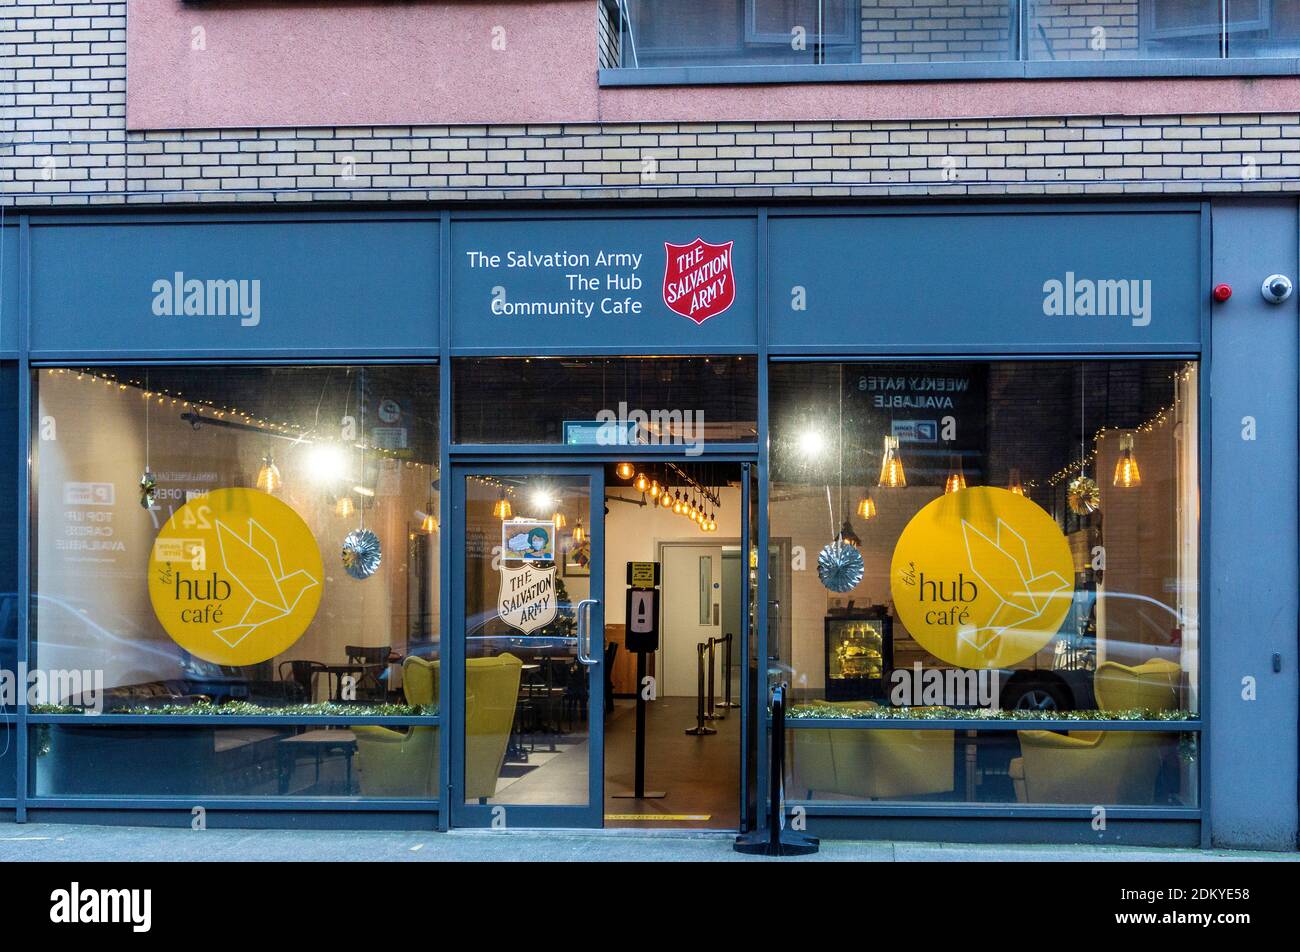 The Salvation Army Community café, hub in Kings Inn Street in Dublin, Ireland. The group operates charity shops, andshelters for the homeless Stock Photo